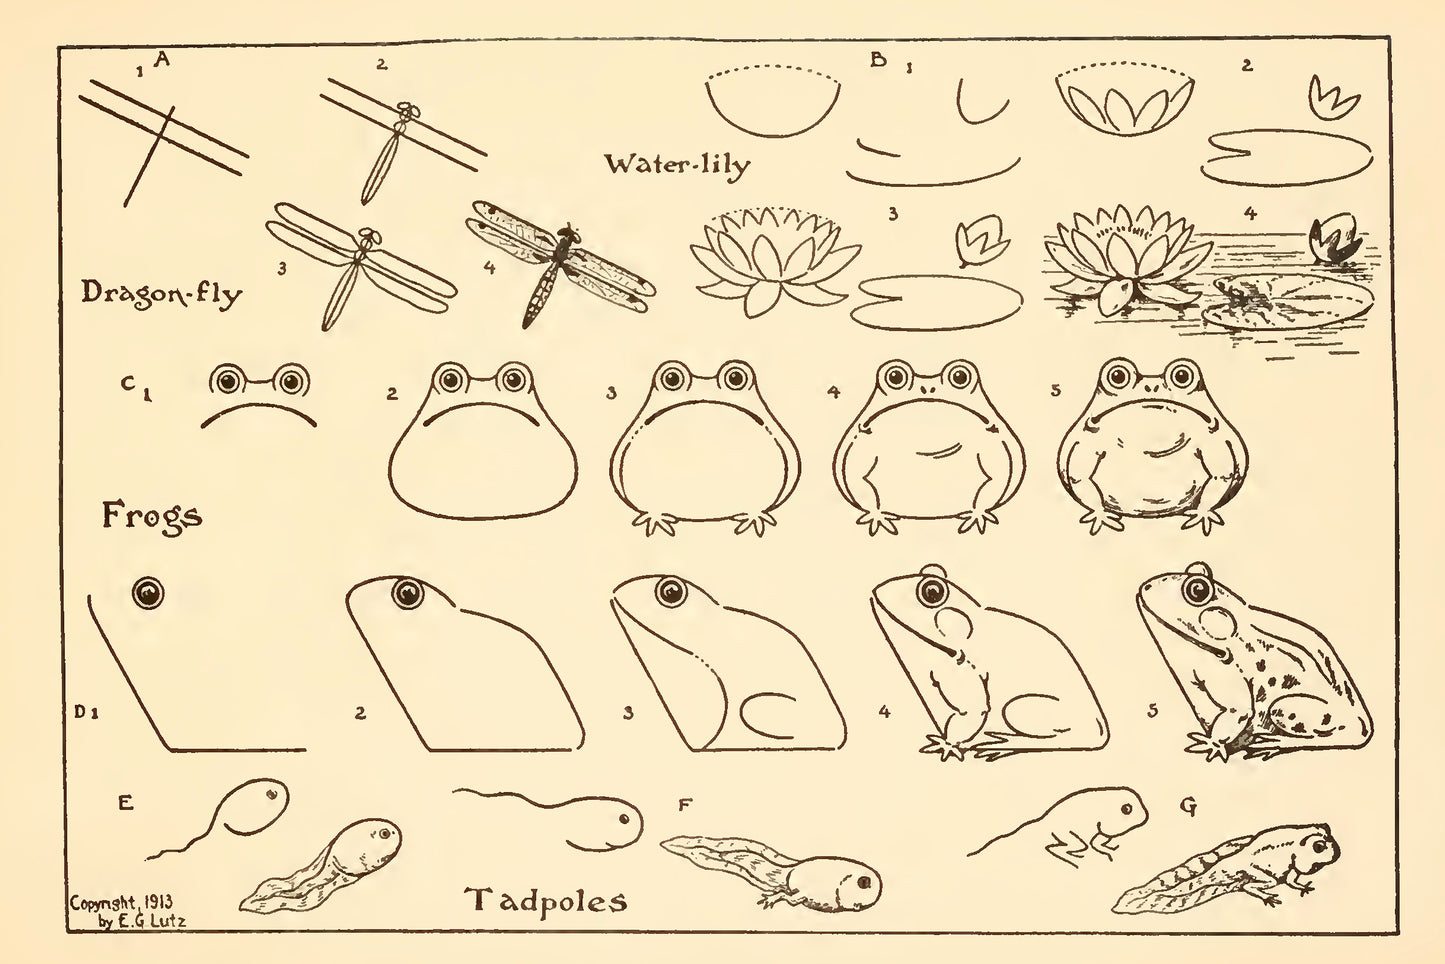 How To Draw Frogs, Dragonflies, Water Lilles and Tadpoles, 1913 - Postcard